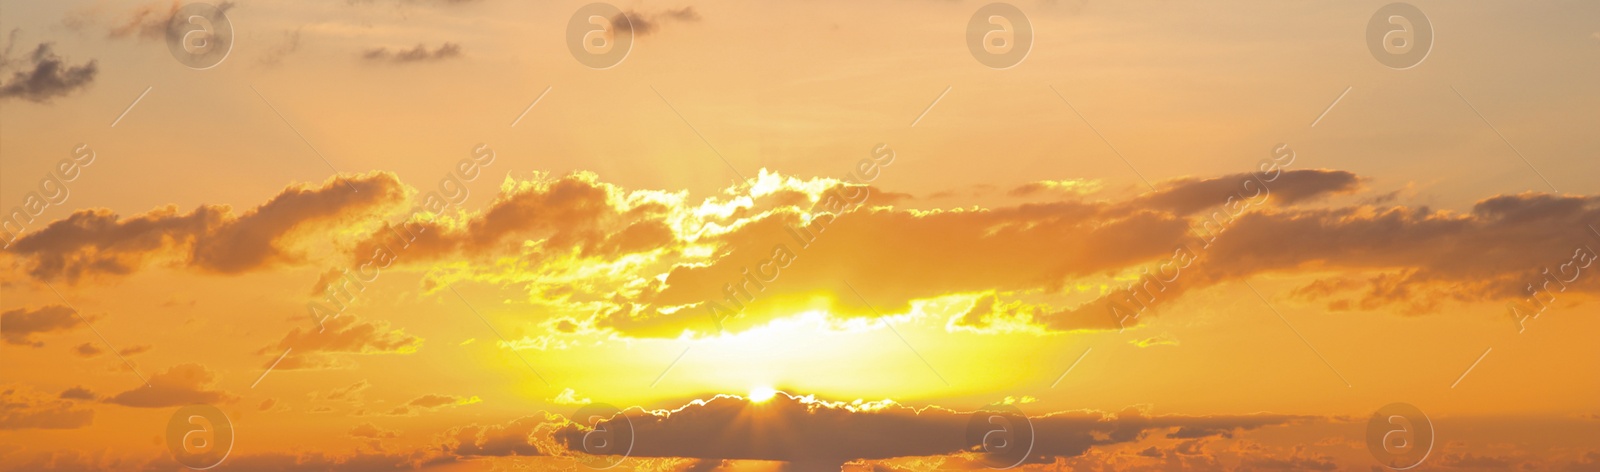 Image of Sun shining through clouds on beautiful sky, banner design